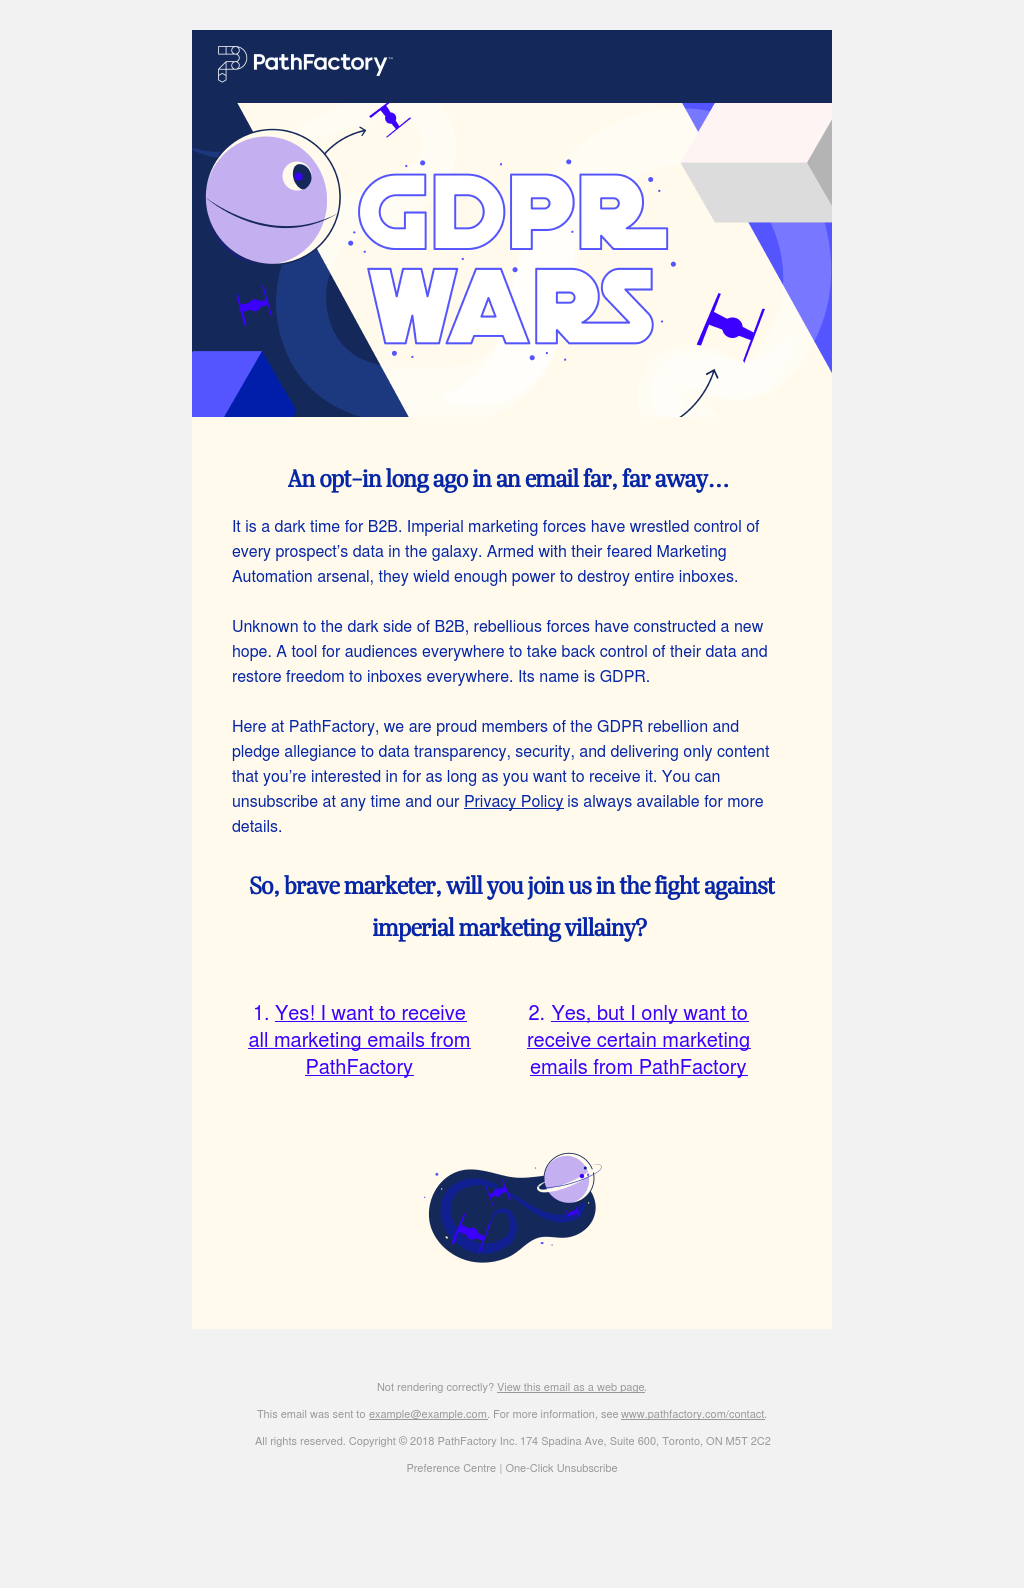 PathFactory GDPR Wars: An opt-in long ago in an email far, far away. . .   It is a dark time for B2B.  Imperial marketing forces have wrestled control of every prospect’s data in the galaxy.  Armed with their feared Marketing Automation arsenal, they wield enough power to destroy entire inboxes.  Unknown to the dark side of B2B, rebellious forces have constructed a new hope.  A tool for audiences everywhere to take back control of their data and restore freedom to inboxes everywhere.  Its name is GDPR.Here at PathFactory, we are proud members of the GDPR rebellion and pledge allegiance to data transparency, security, and delivering only content that you’re interested in for as long as you want to receive it.  You can unsubscribe at any time and our Privacy Policy is always available for more details.  So, brave marketer, will you join us in the fight against imperial marketing villainy? 1. Yes! I want to receive all marketing emails from PathFactory 2. Yes, but I only want to receive certain marketing emails from PathFactory.